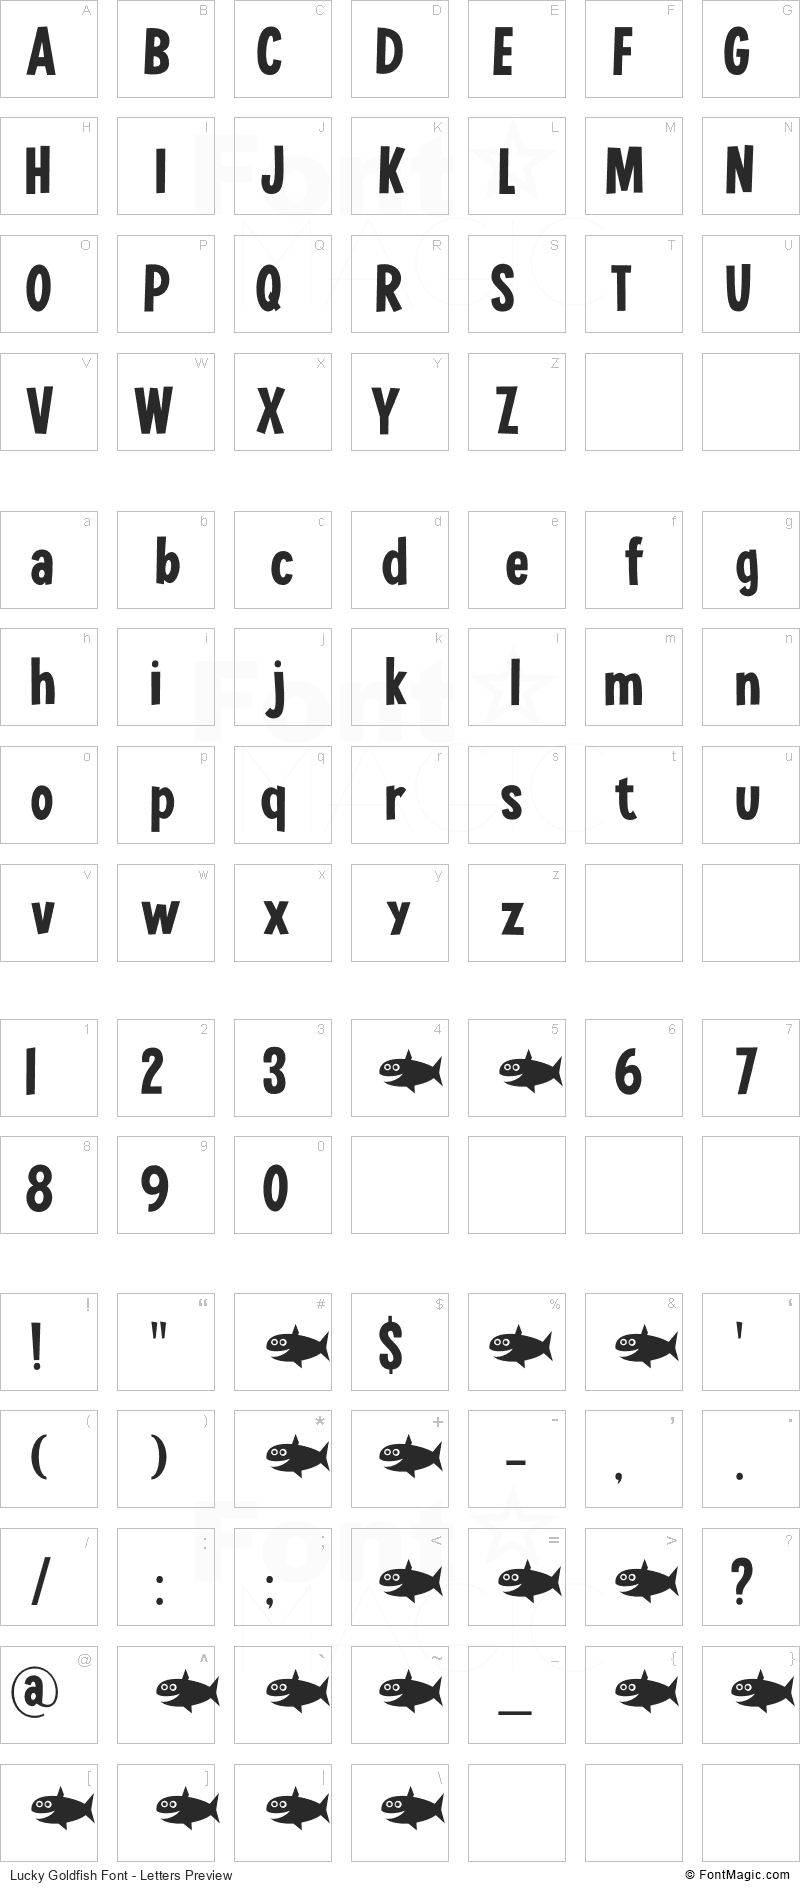 Lucky Goldfish Font - All Latters Preview Chart